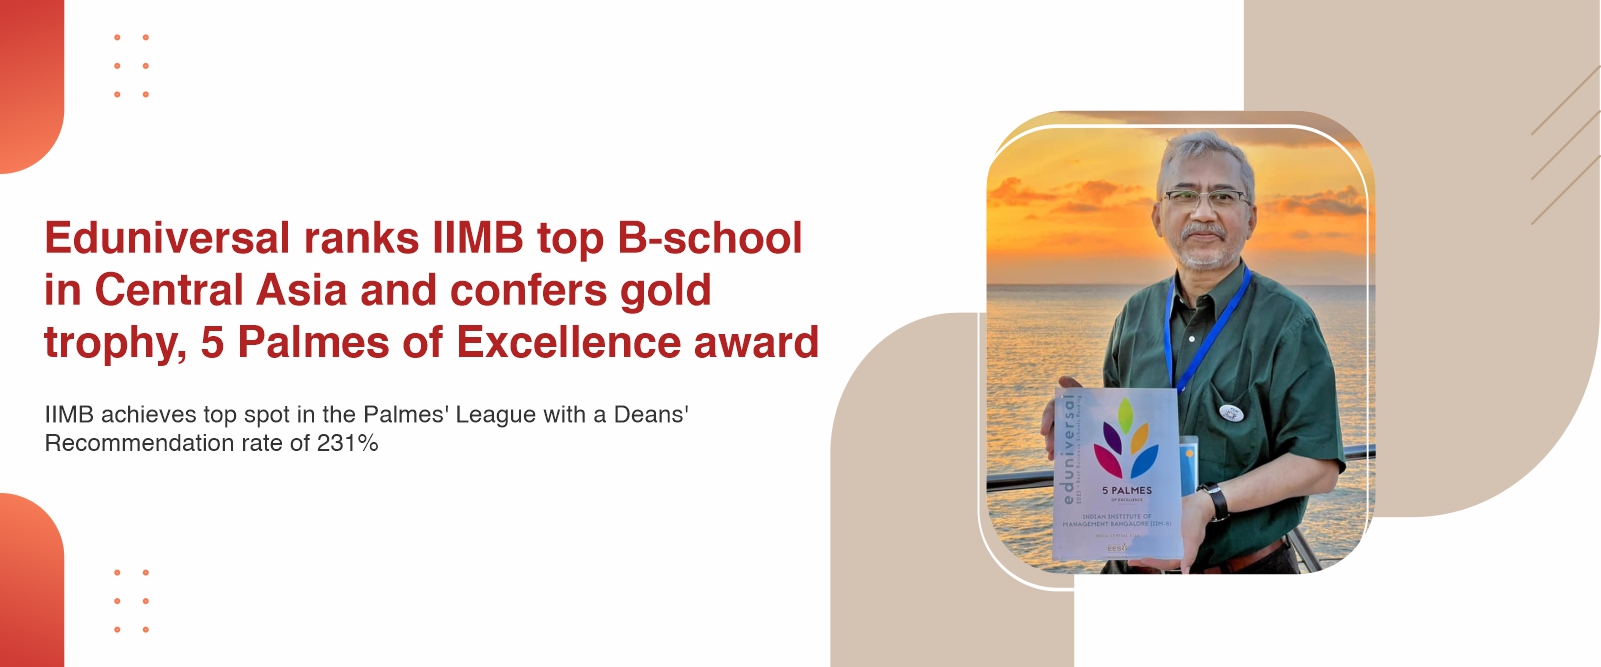 Eduniversal ranks IIMB top B-school in Central Asia and confers gold trophy, 5 Palmes of Excellence award